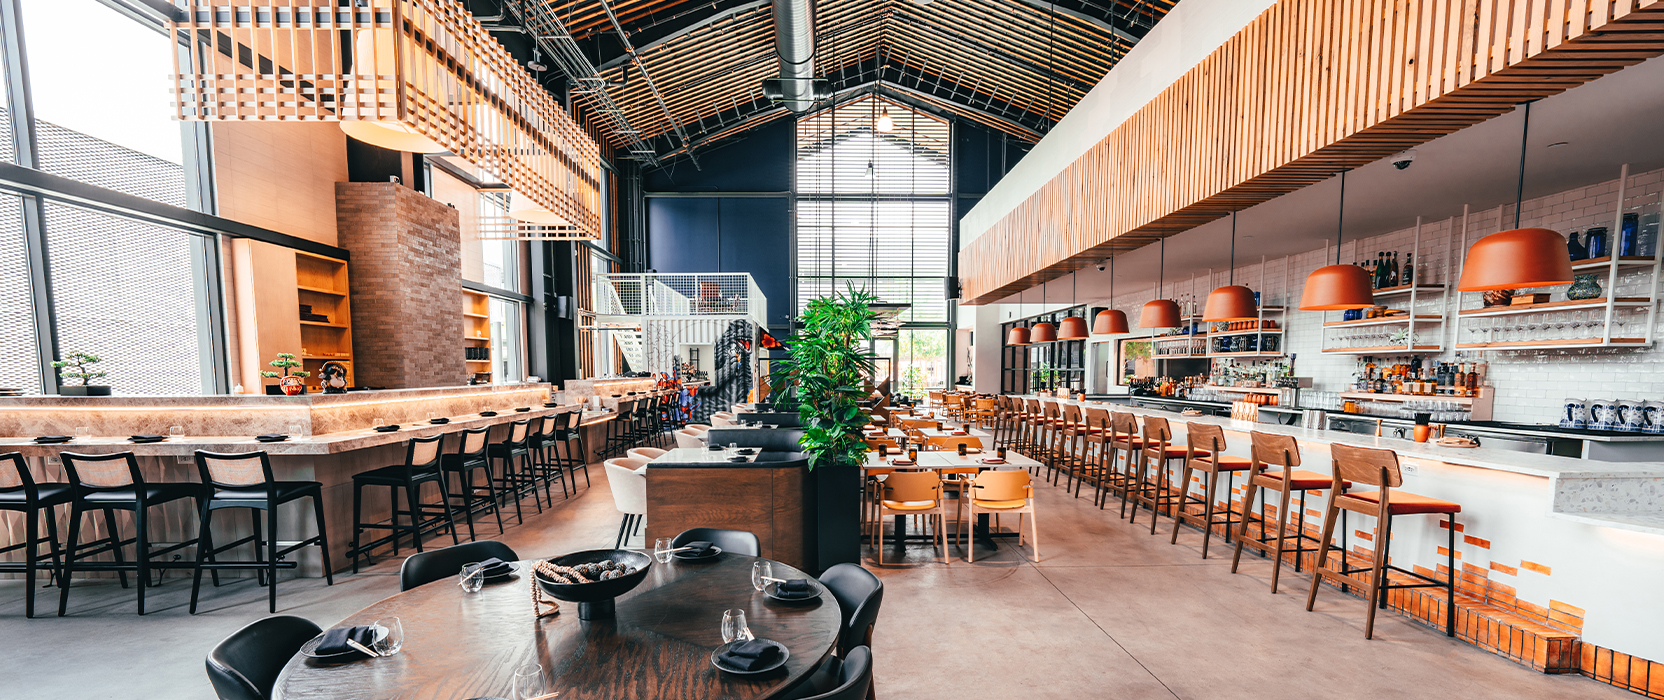 Interior of spacious and high-ceilinged food hall with bar seating and tables throughout, natural wood accents, brick, and dark blue and white color scheme.